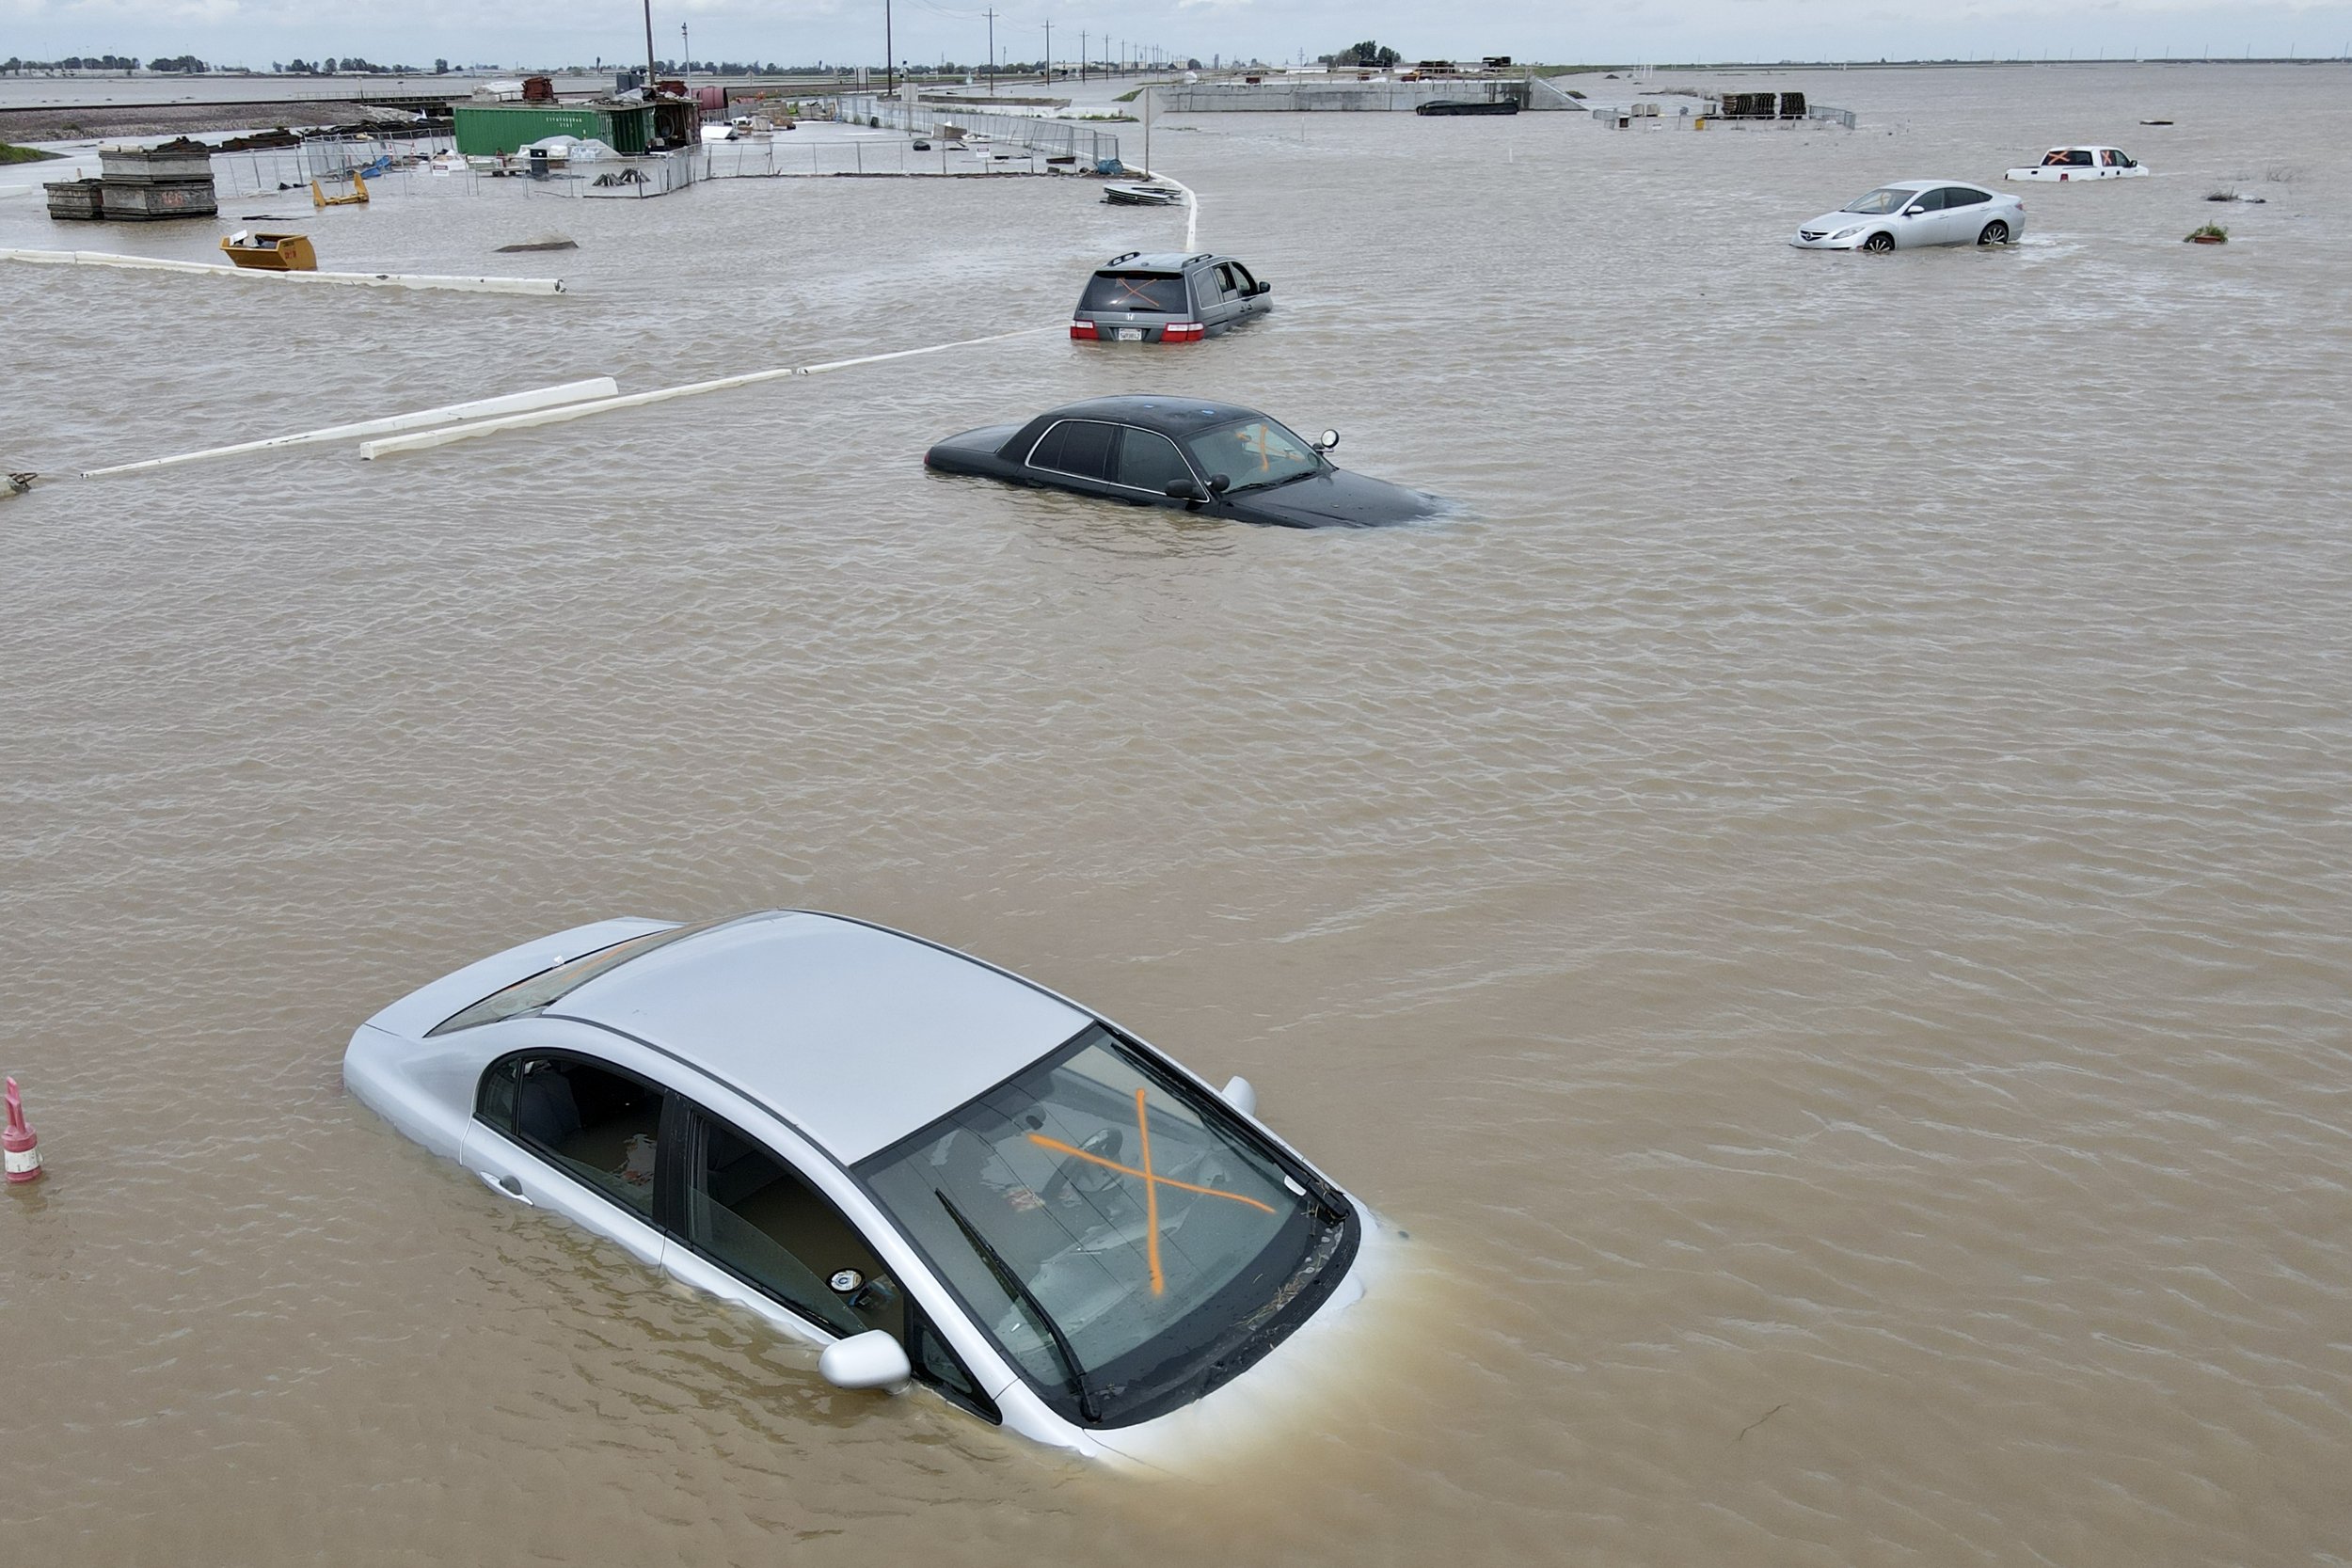  Cars sit abandoned on roads as floodwaters from the Tule River inundate the area after days of heavy rain in Corcoran, California, U.S., March 21, 2023. 